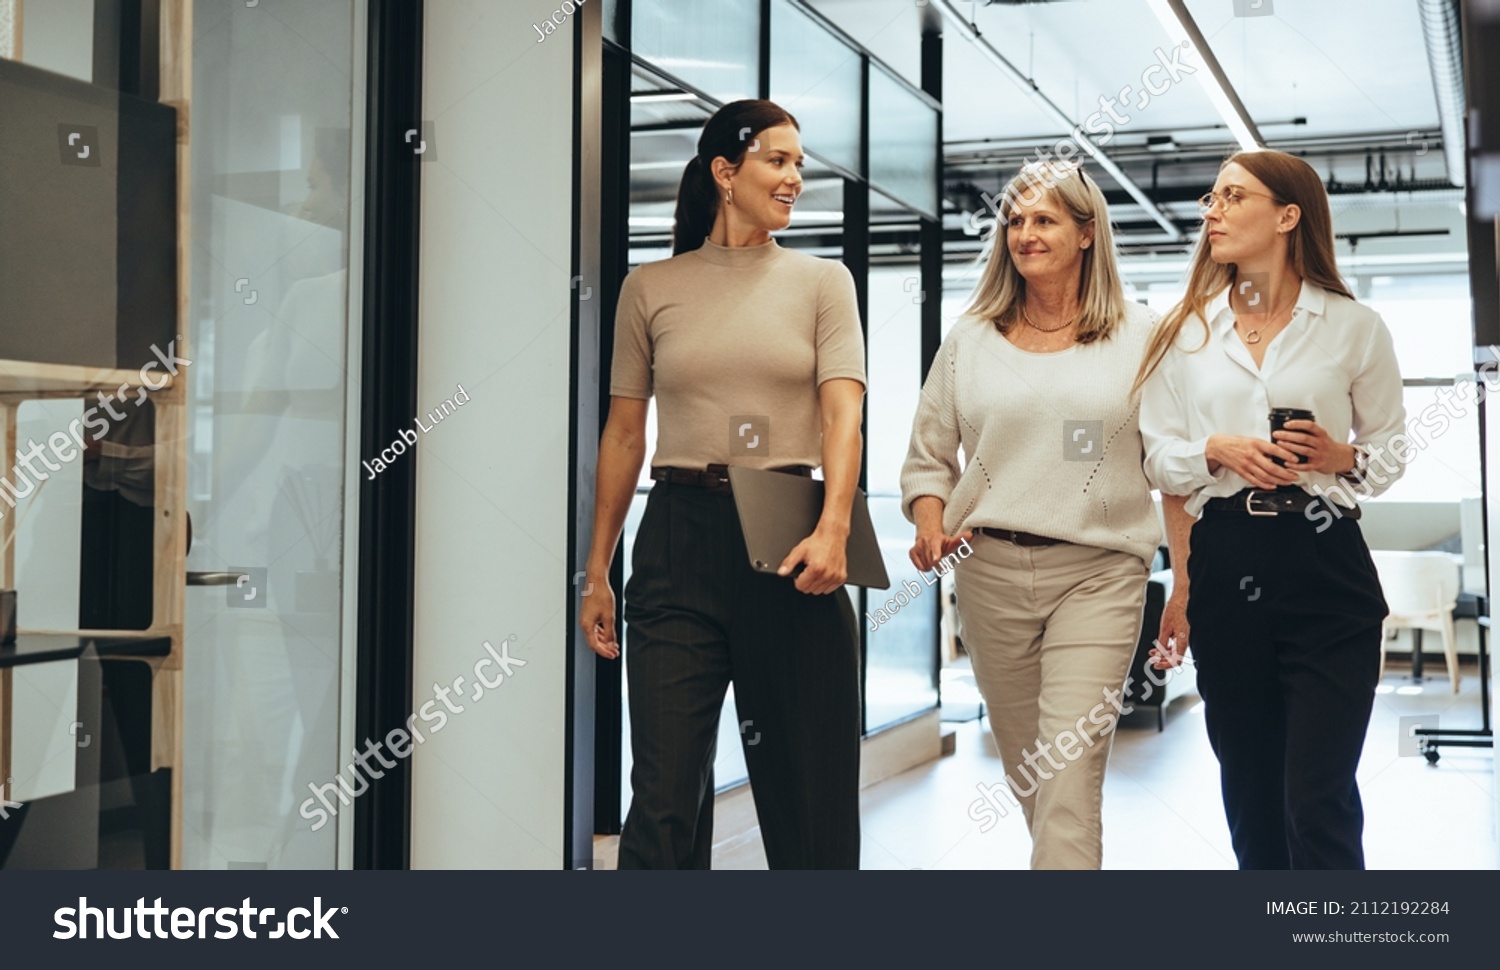 Three cheerful businesswomen walking together in an office. Diverse group of businesswomen smiling while having a discussion. Successful female colleagues collaborating on a new project. #2112192284